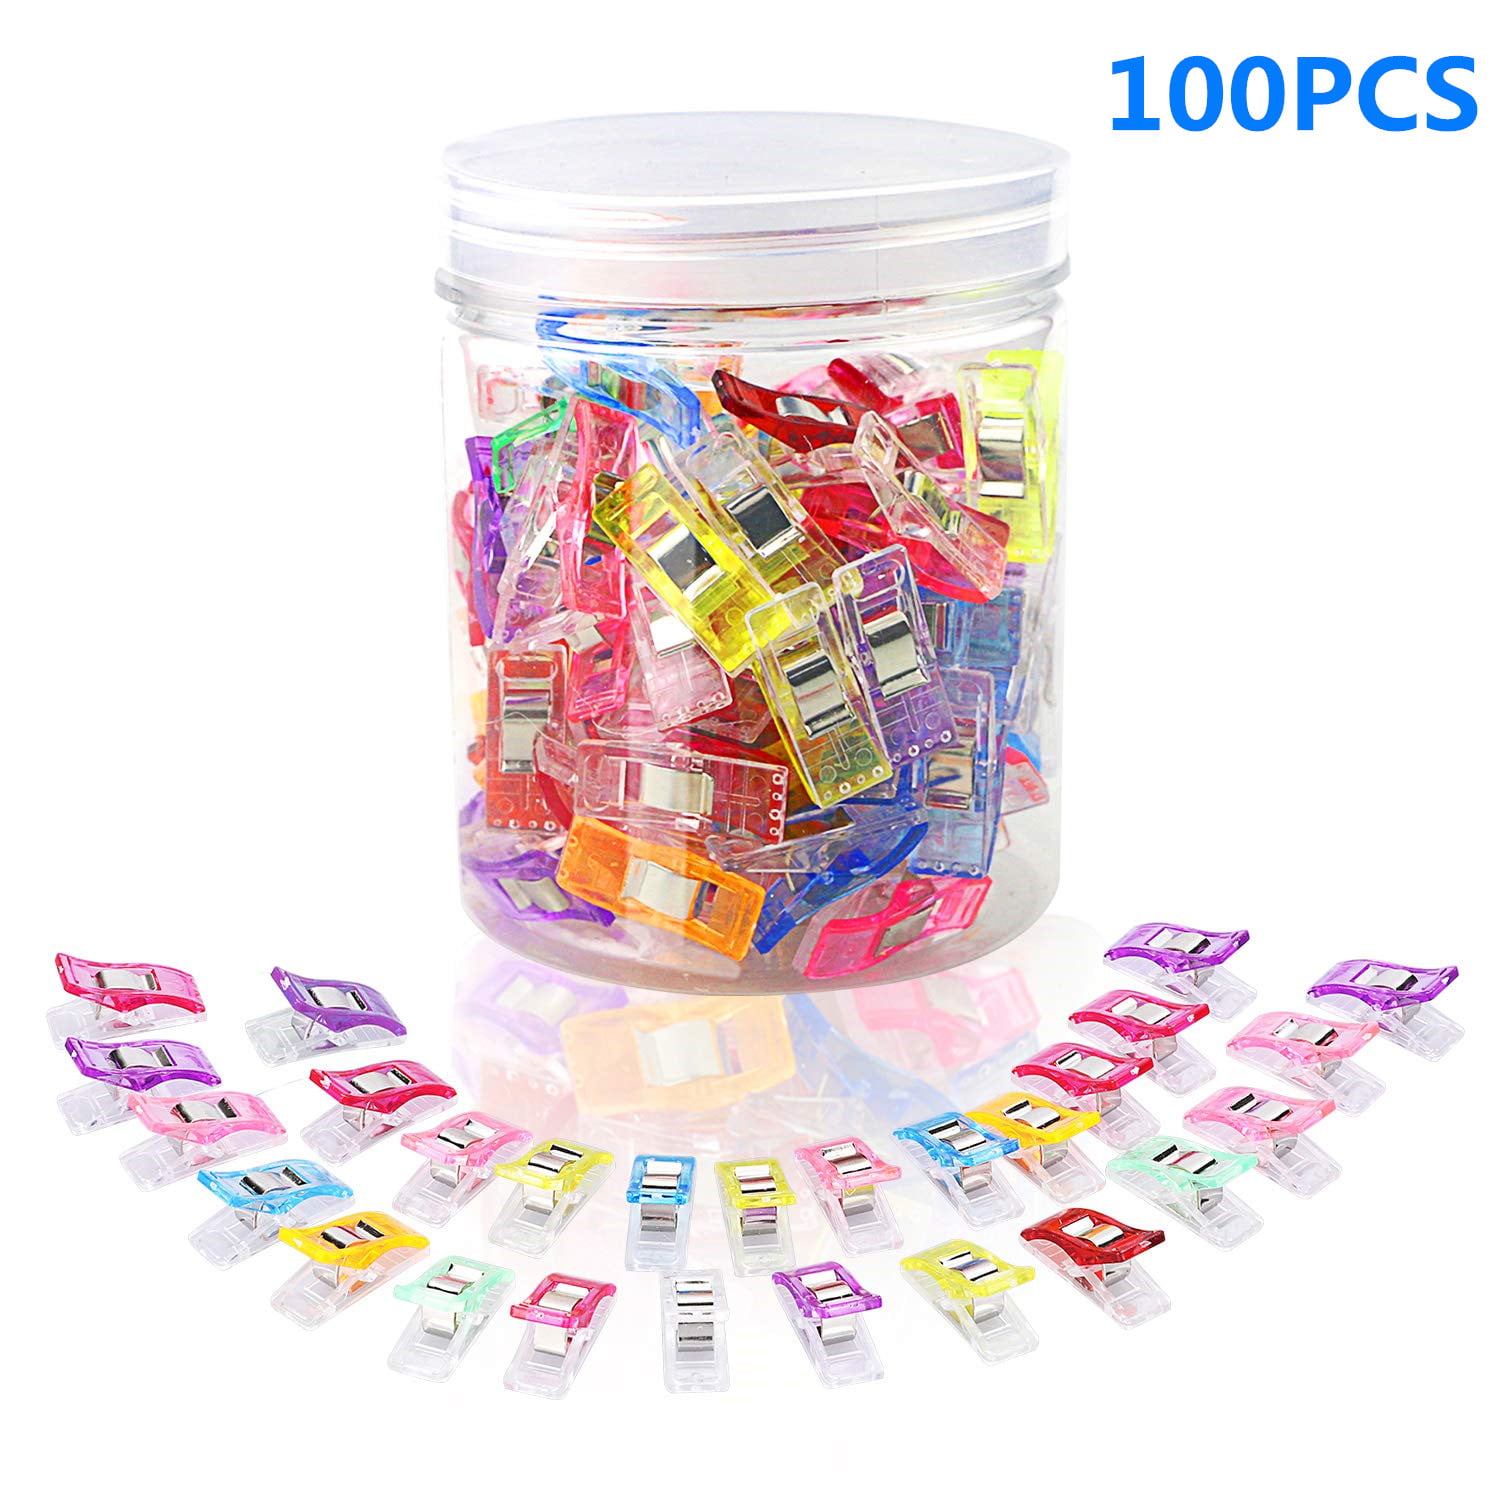 50 PCS Multipurpose Sewing Clips Multicolor Craft Sewing Accessories Clips for Sew Binding,Crafts,Paper Work and Hanging Little Things